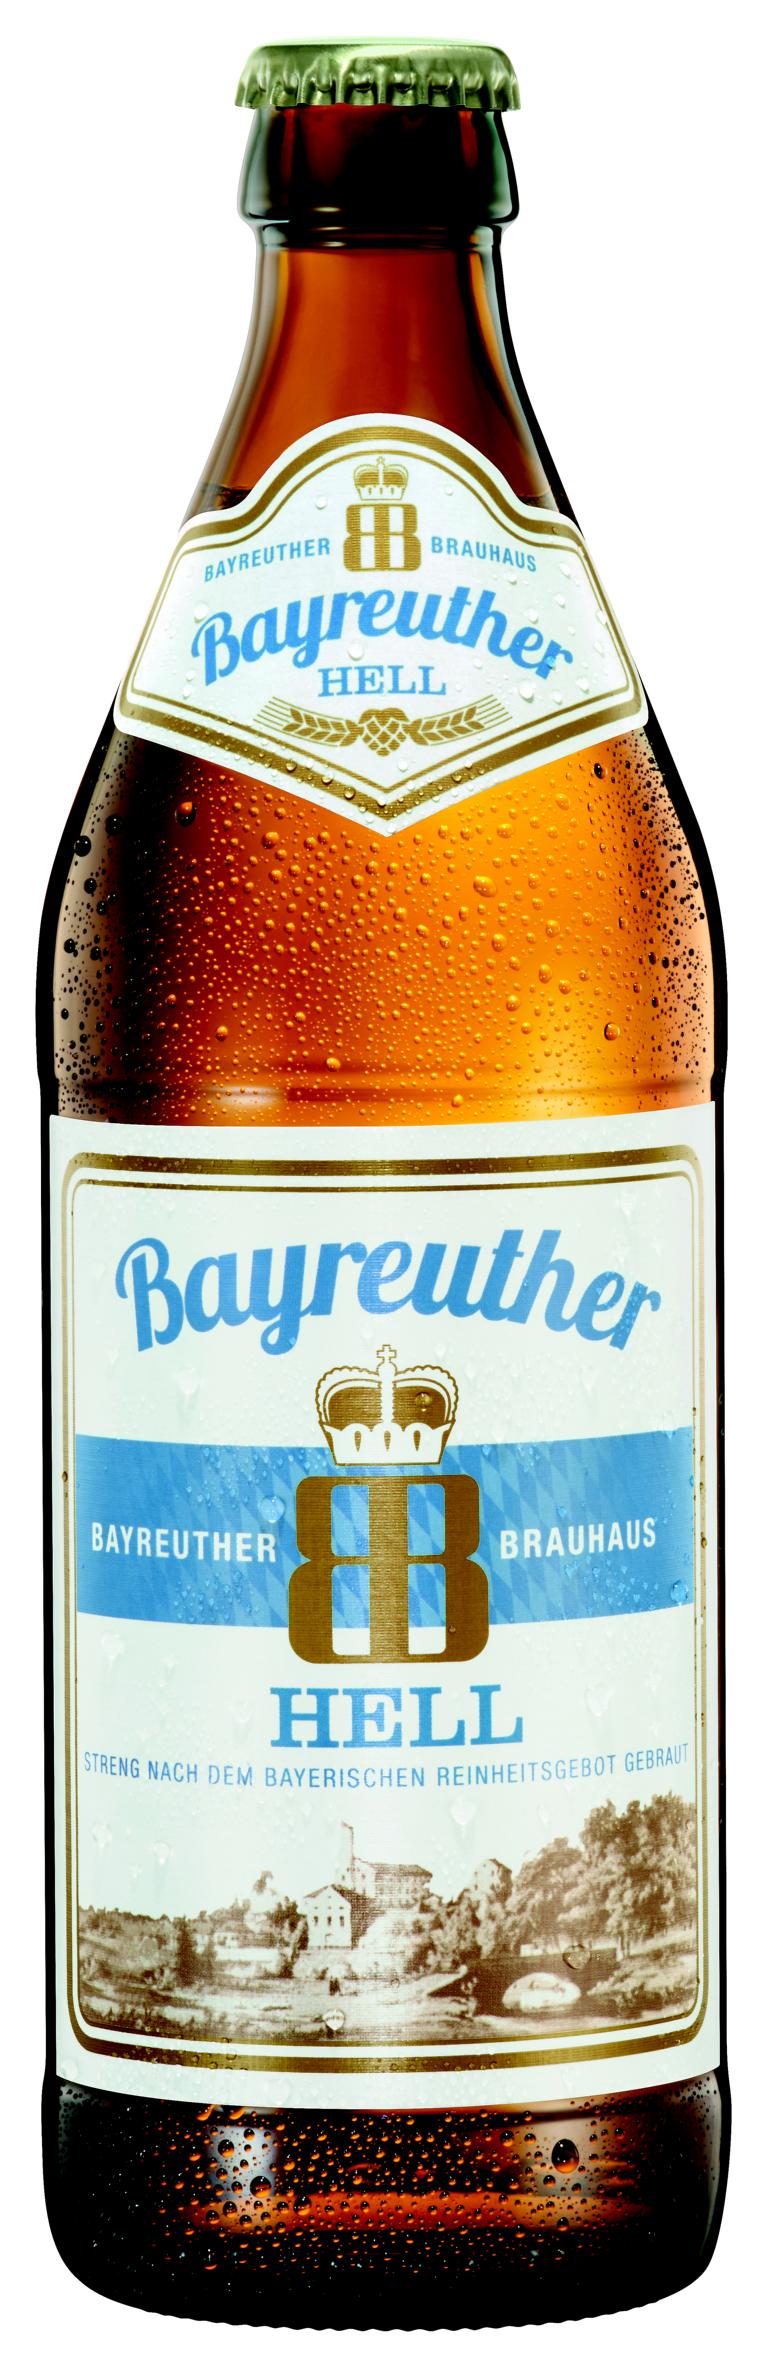 Bayreuther HELL 20x0,5 l